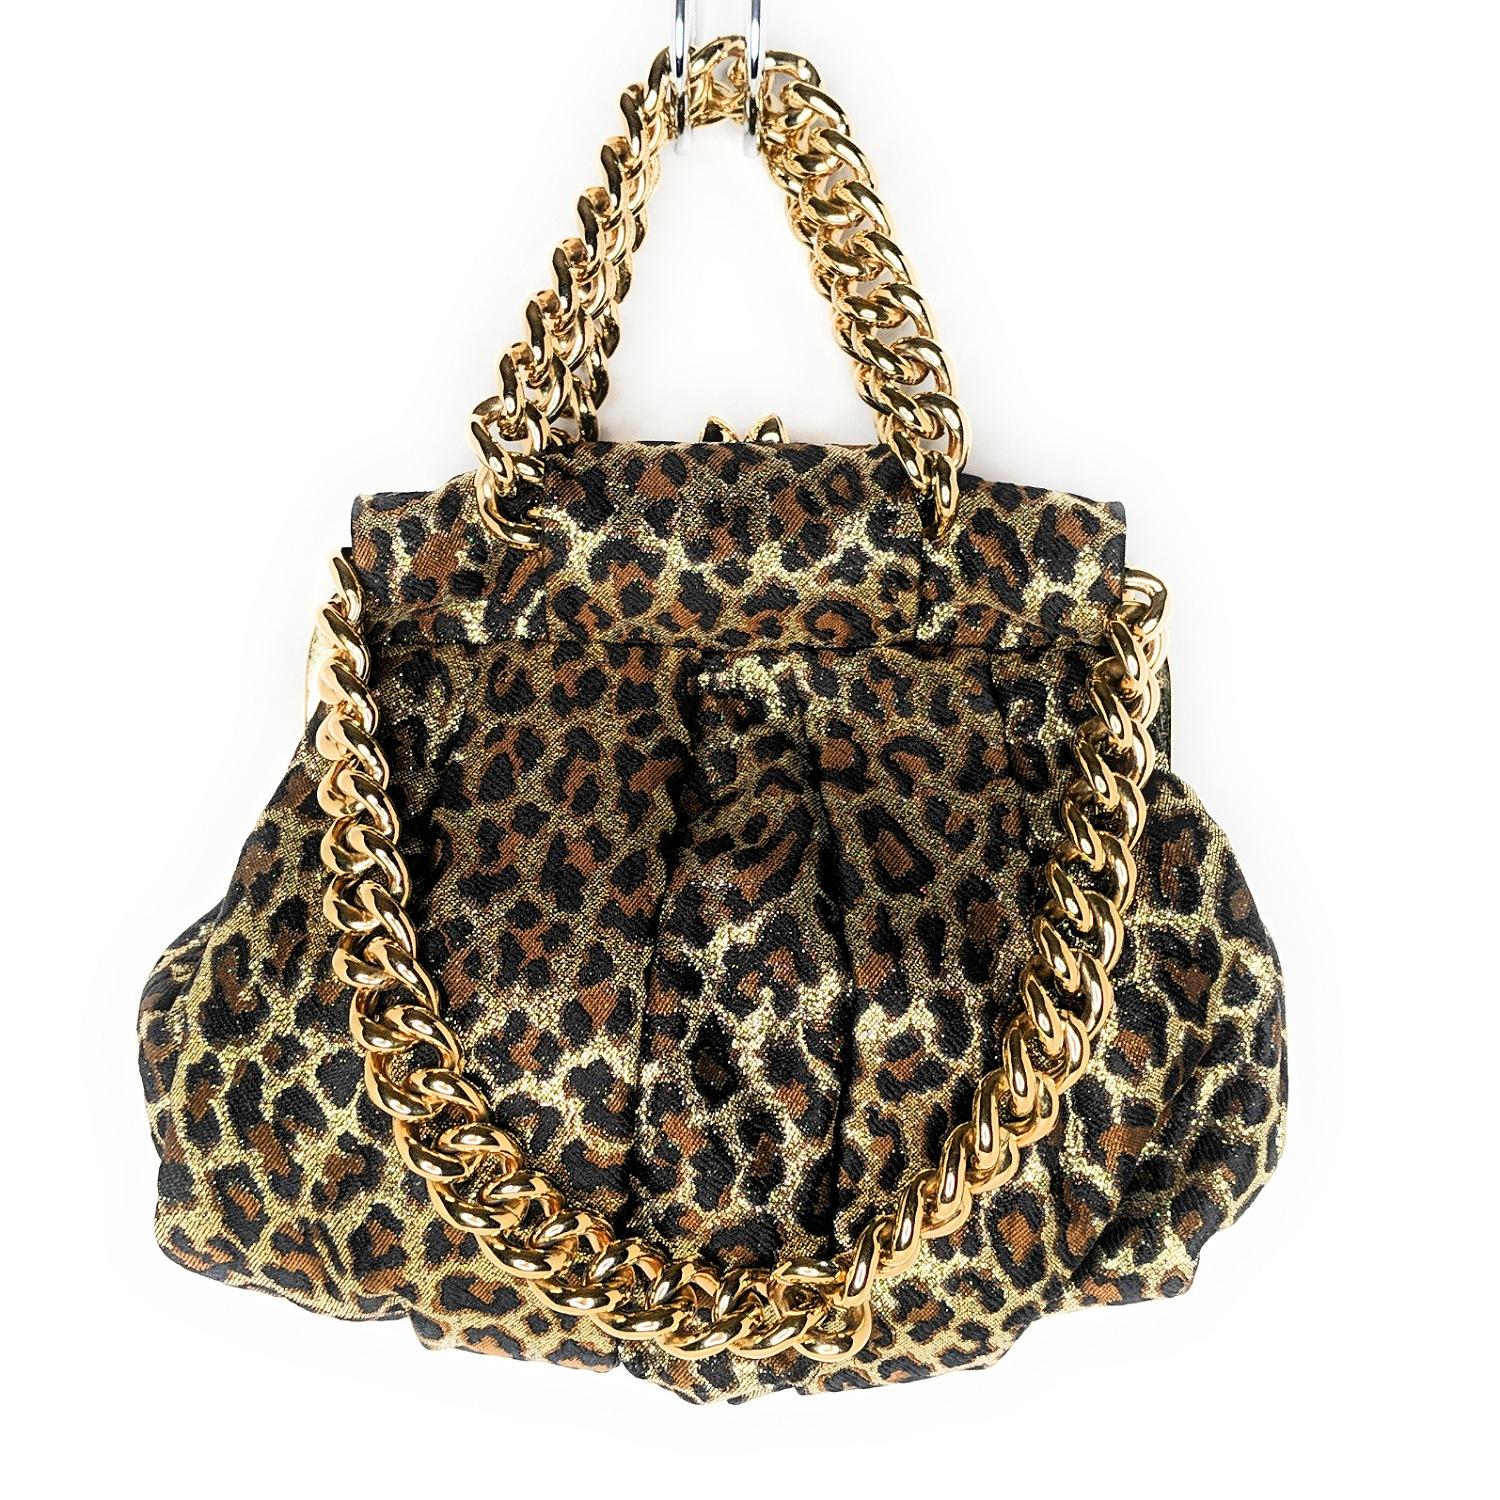 Black, brown and metallic gold Christian Louboutin leopard-patterned bag with gold-tone chains and frame top, red satin interior and molded stiletto heel hinge-lock closure. Retail price is $1,395.

Designer: Christian Louboutin
Material: Glitter